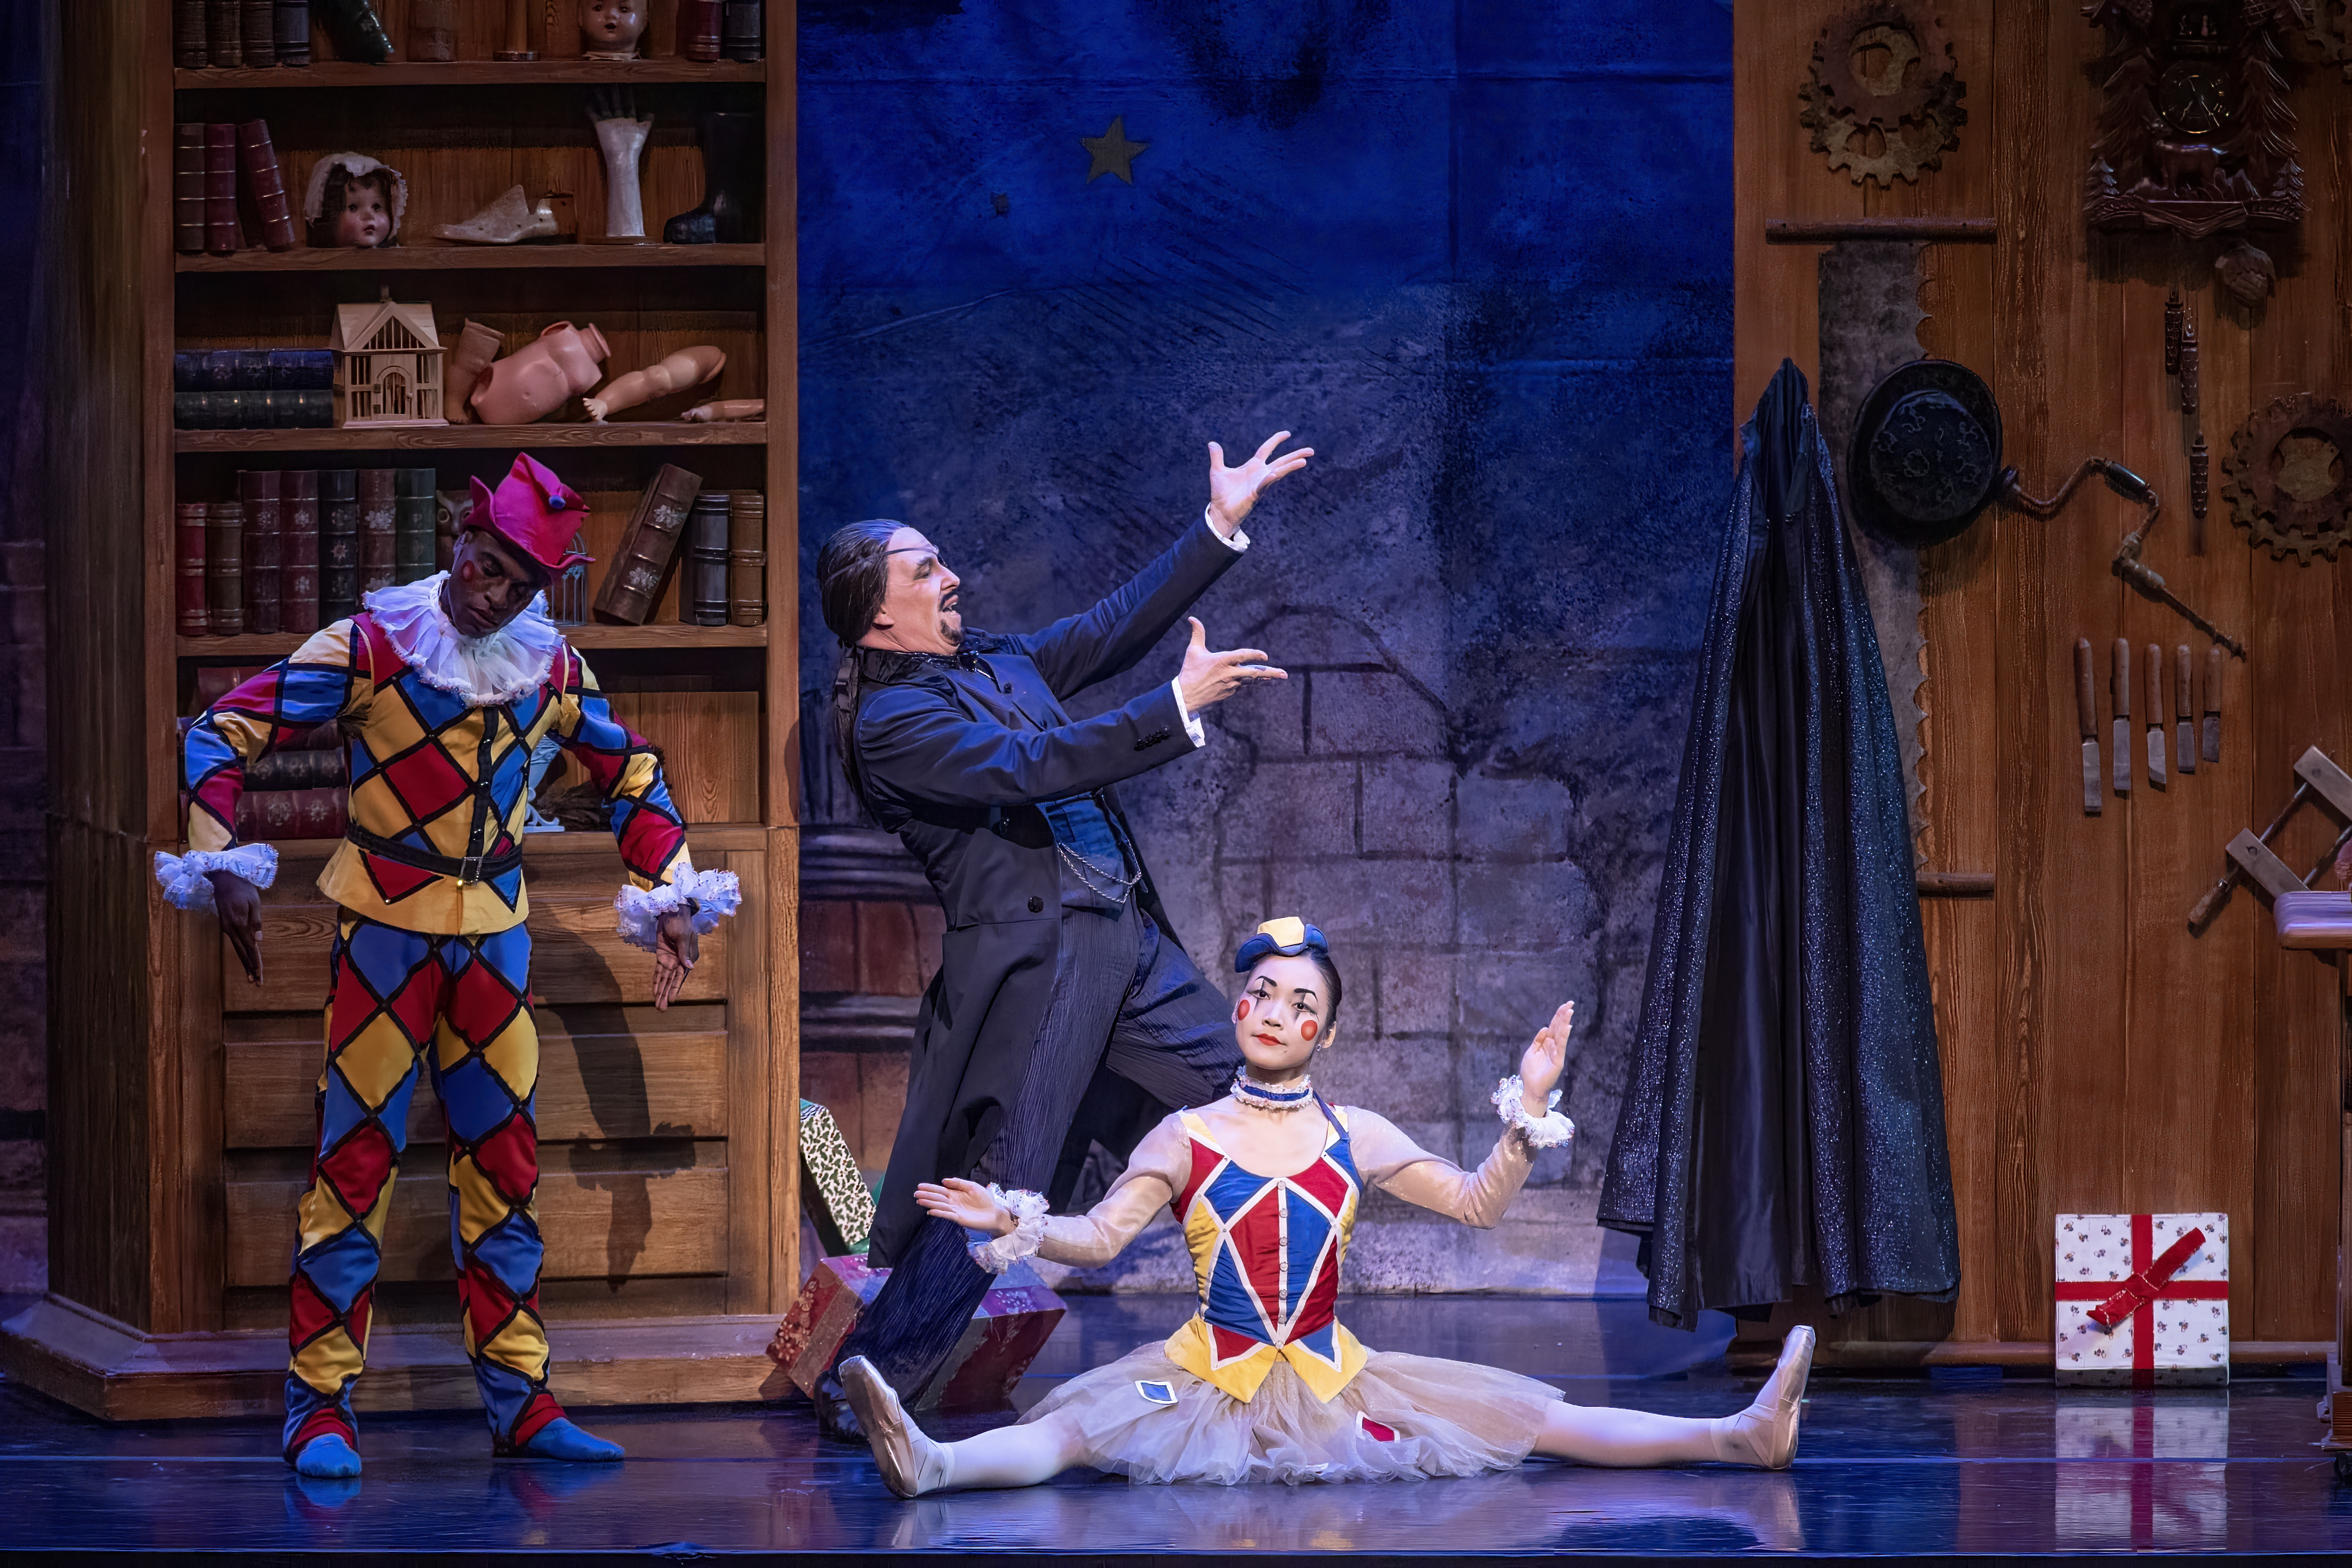 REVIEW: Ballet outdoes itself with annual holiday classic